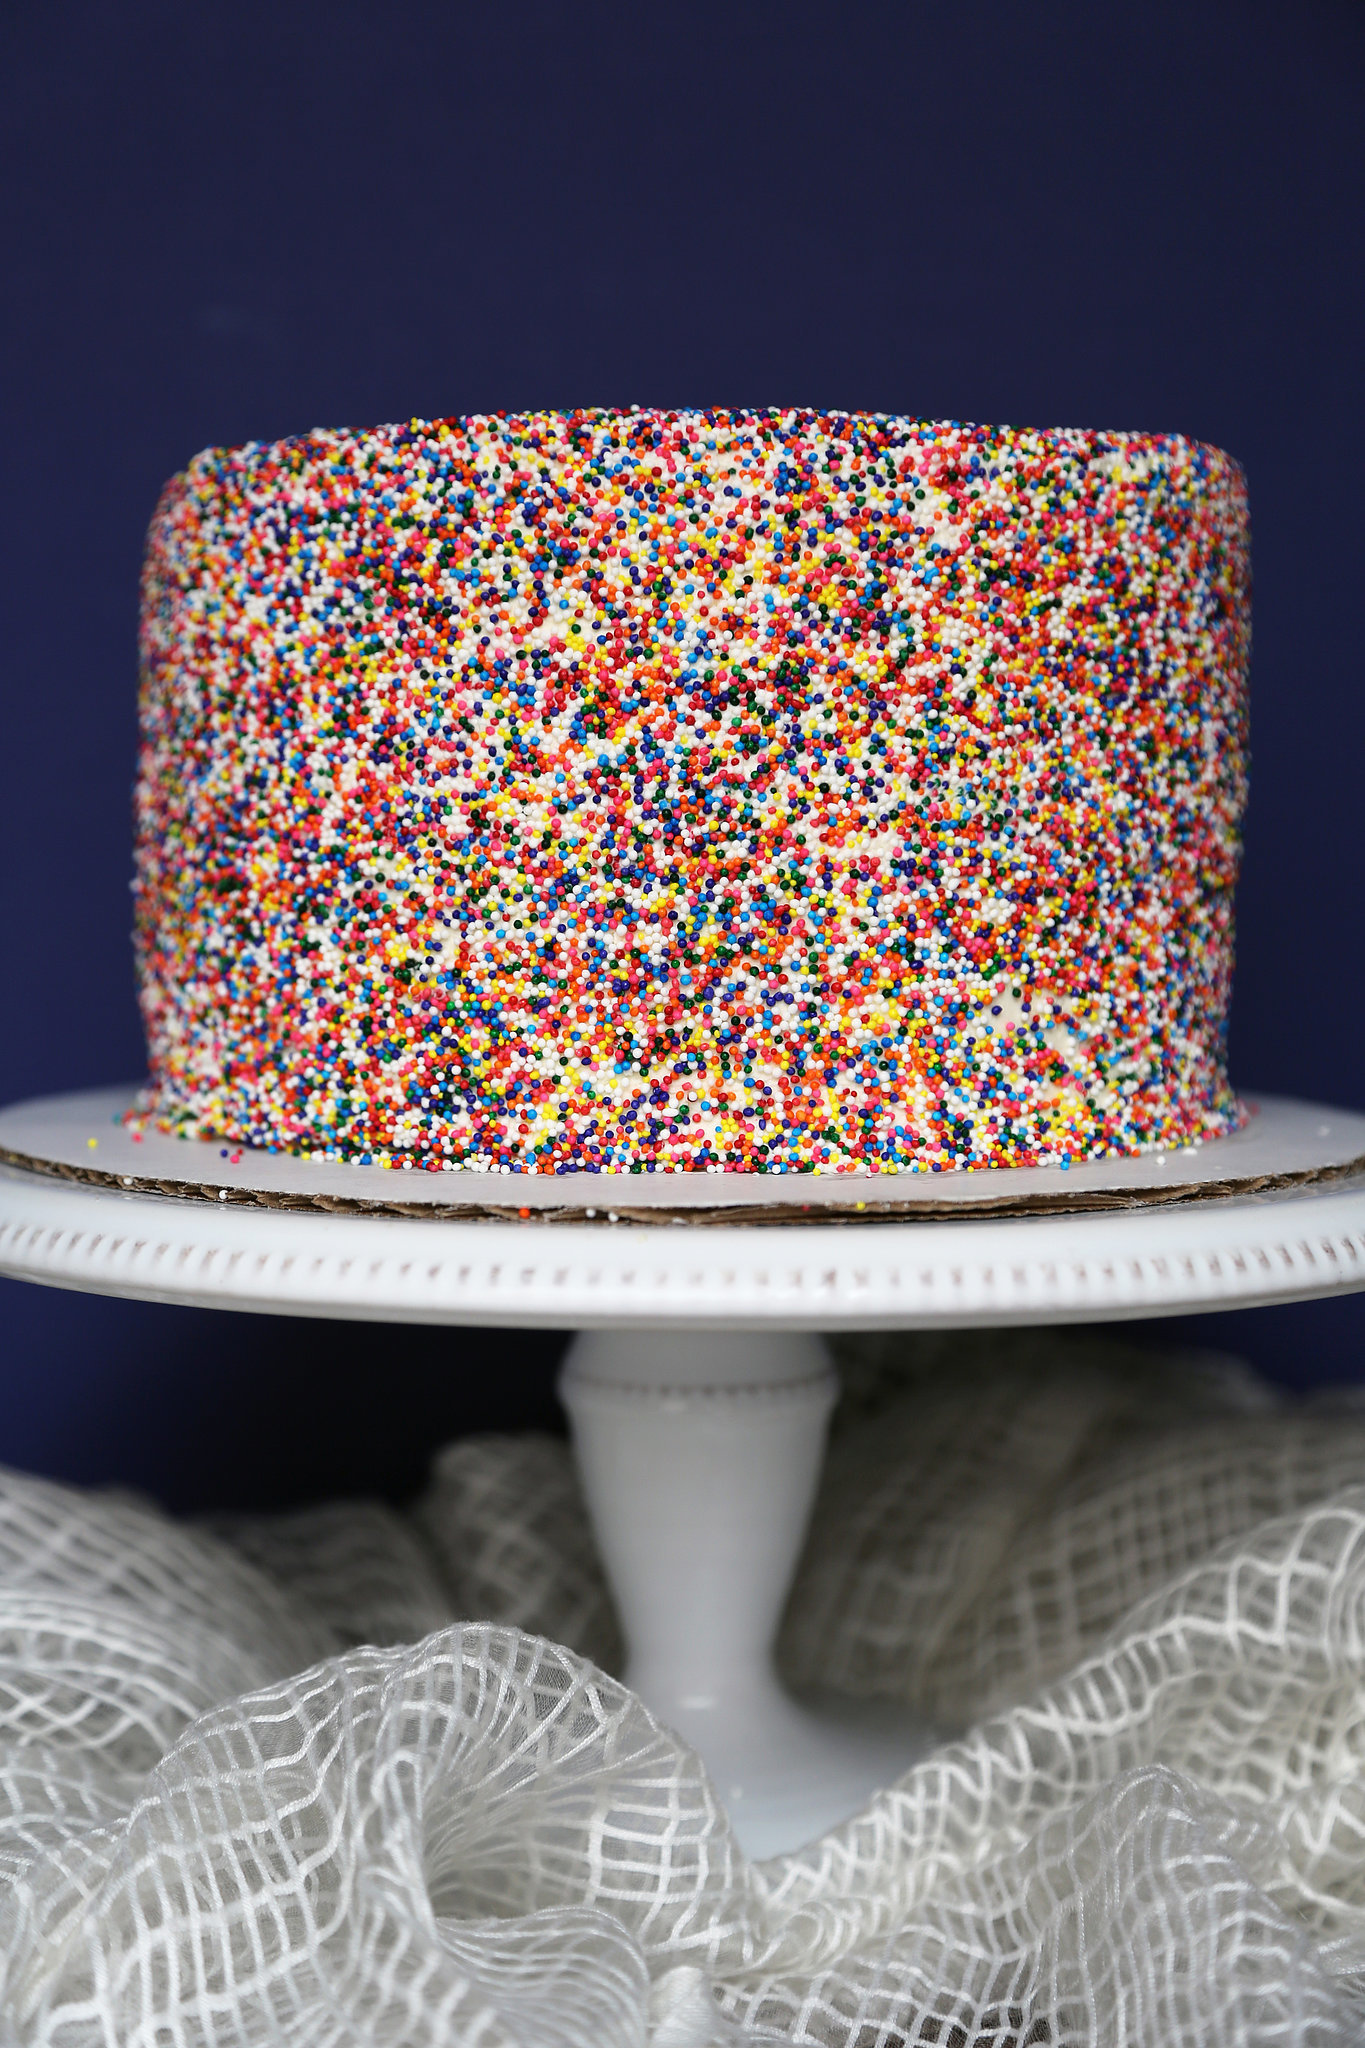 How To Make An Exploding Sprinkle Cake {Video} - Erin Brighton